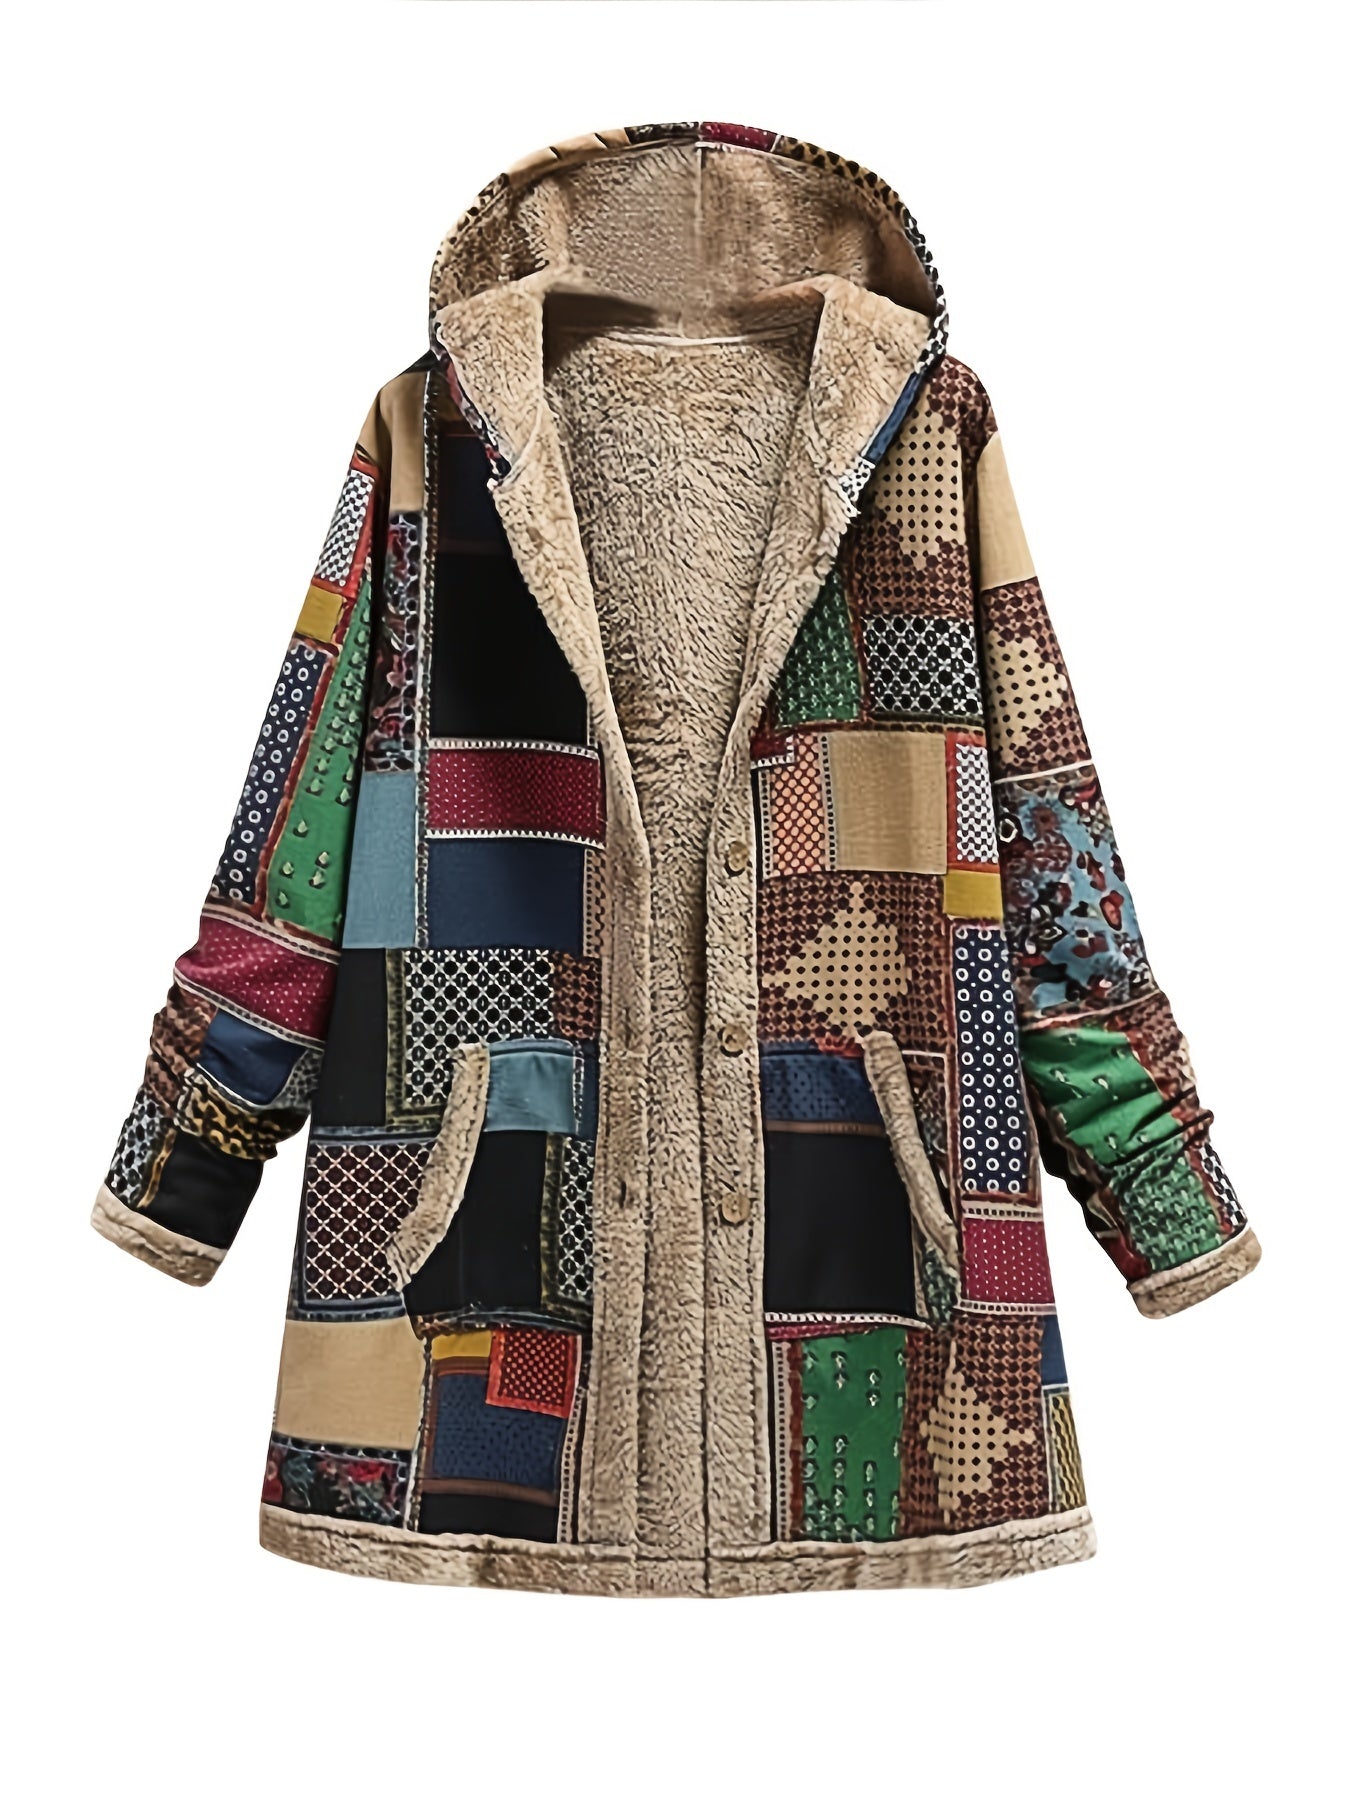 vlovelaw  Retro Patchwork Hooded Jacket, Long Sleeve Button Up Casual Outerwear For Fall & Winter, Women's Clothing